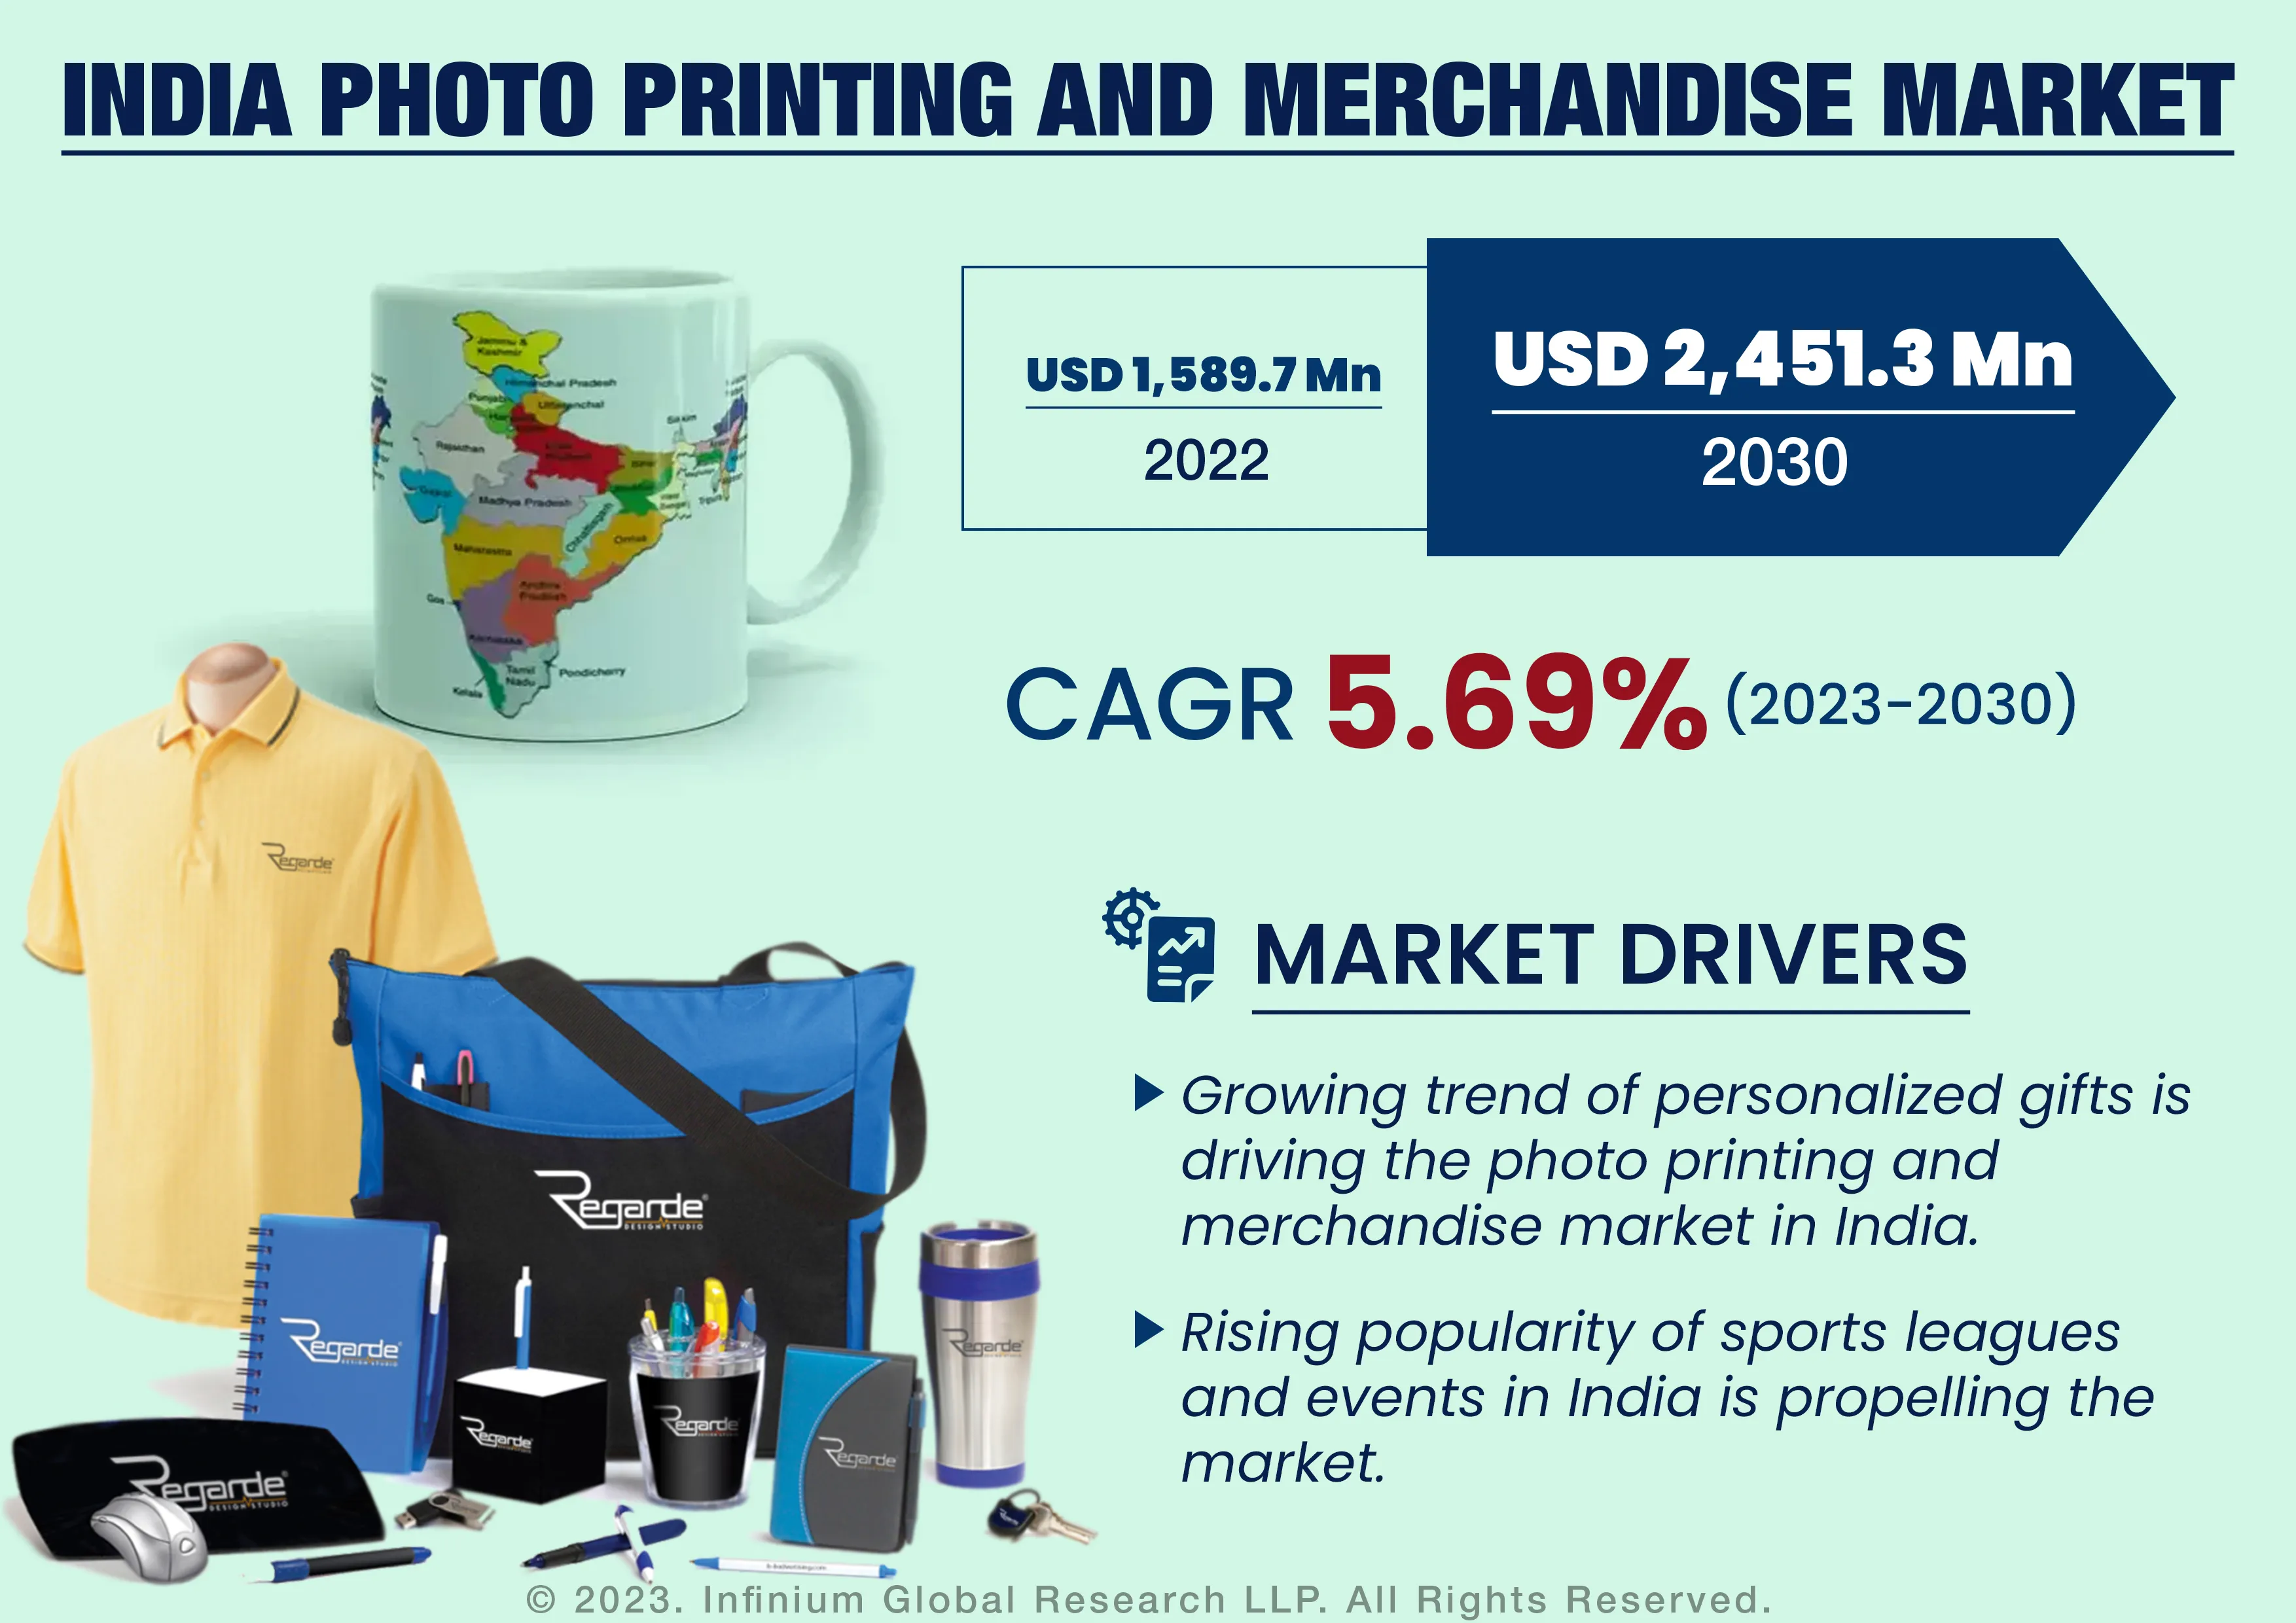 India Photo Printing and Merchandise Market was Valued at USD 1,589.7 Million in 2022 and is Expected to Reach USD 2,451.3 Million by 2030 and Grow at a CAGR of 5.69% Over the Forecast Period.